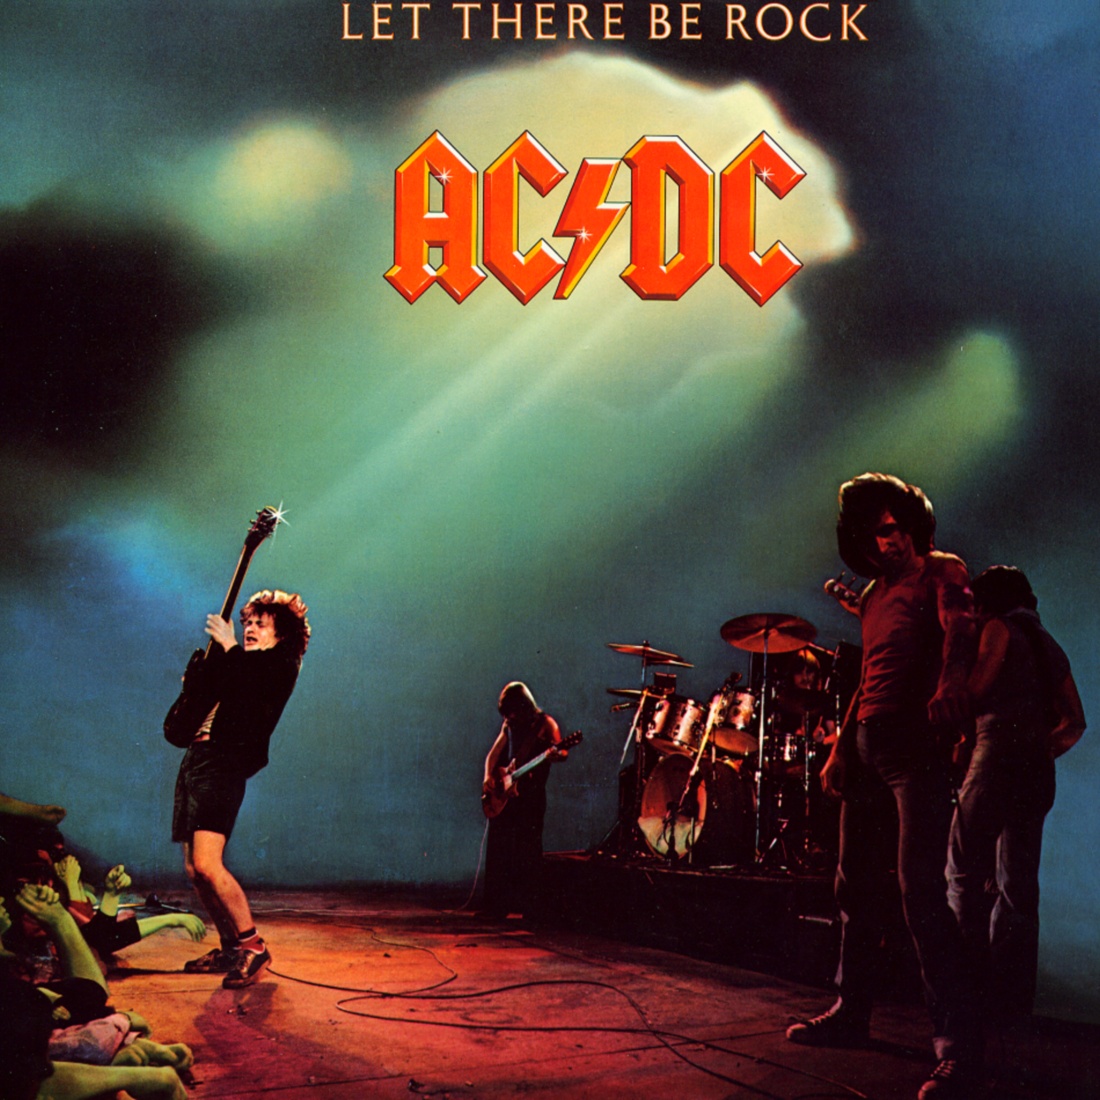 Acdc_Let there be rock_1